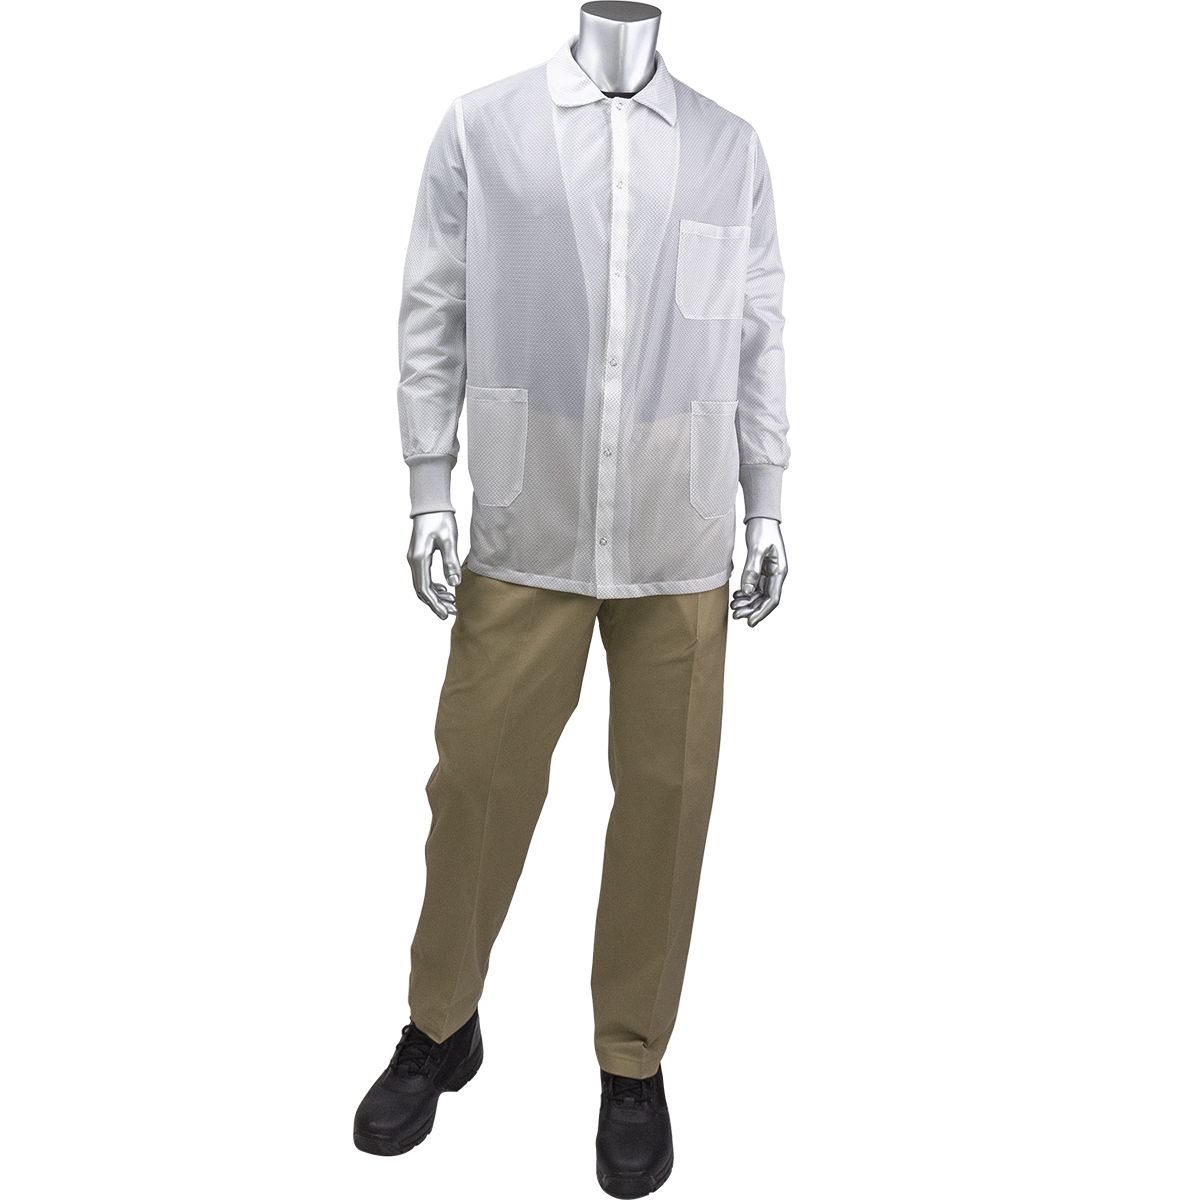 BR49AC-44WH PIP® Uniform Technology™ StatStar Short ESD Labcoats w/ ESD Knit Cuffs, White